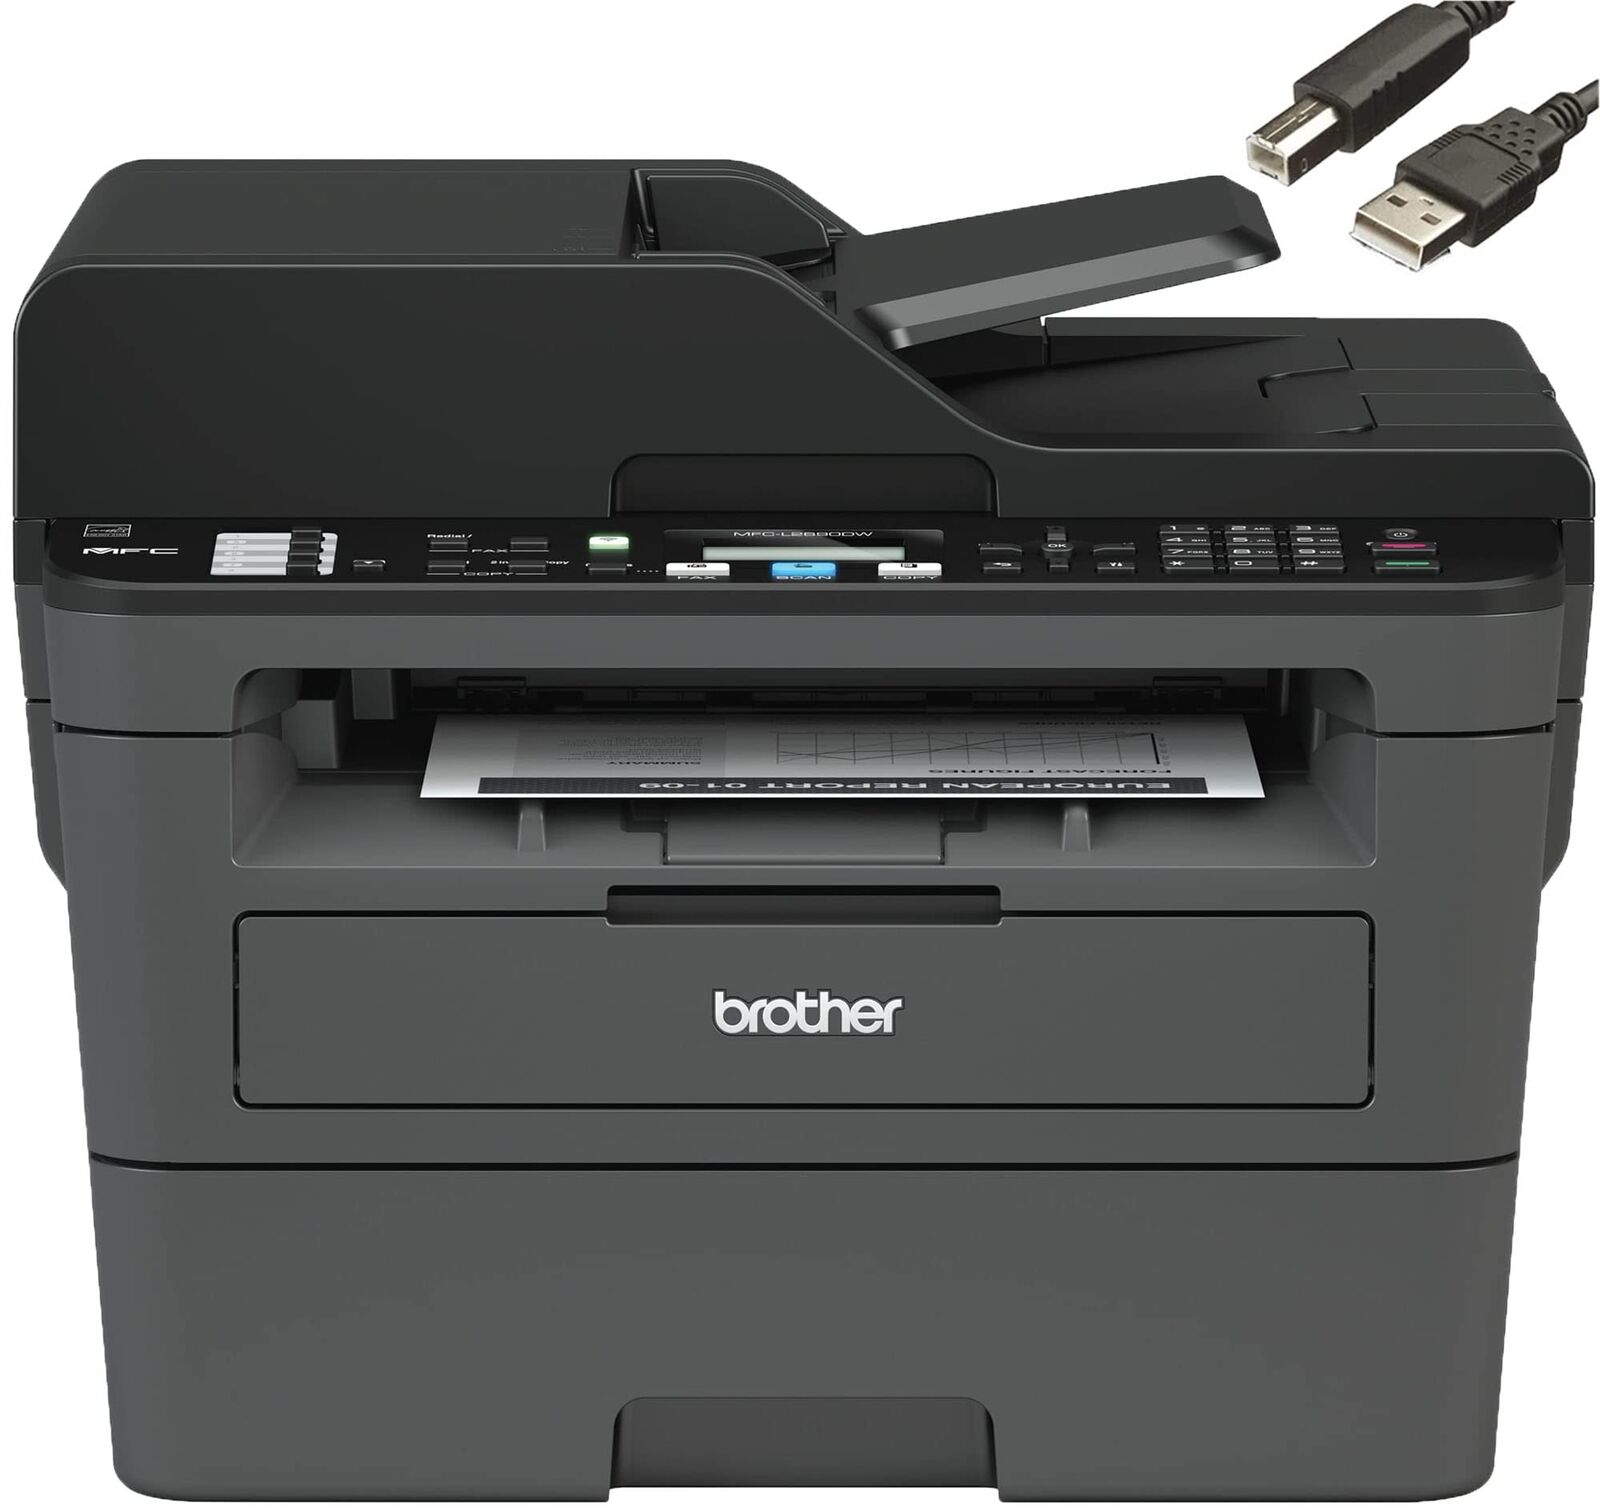 Brother MFC-L2690DW Monochrome Laser All-in-One Printer, Print Scan Copy Fax